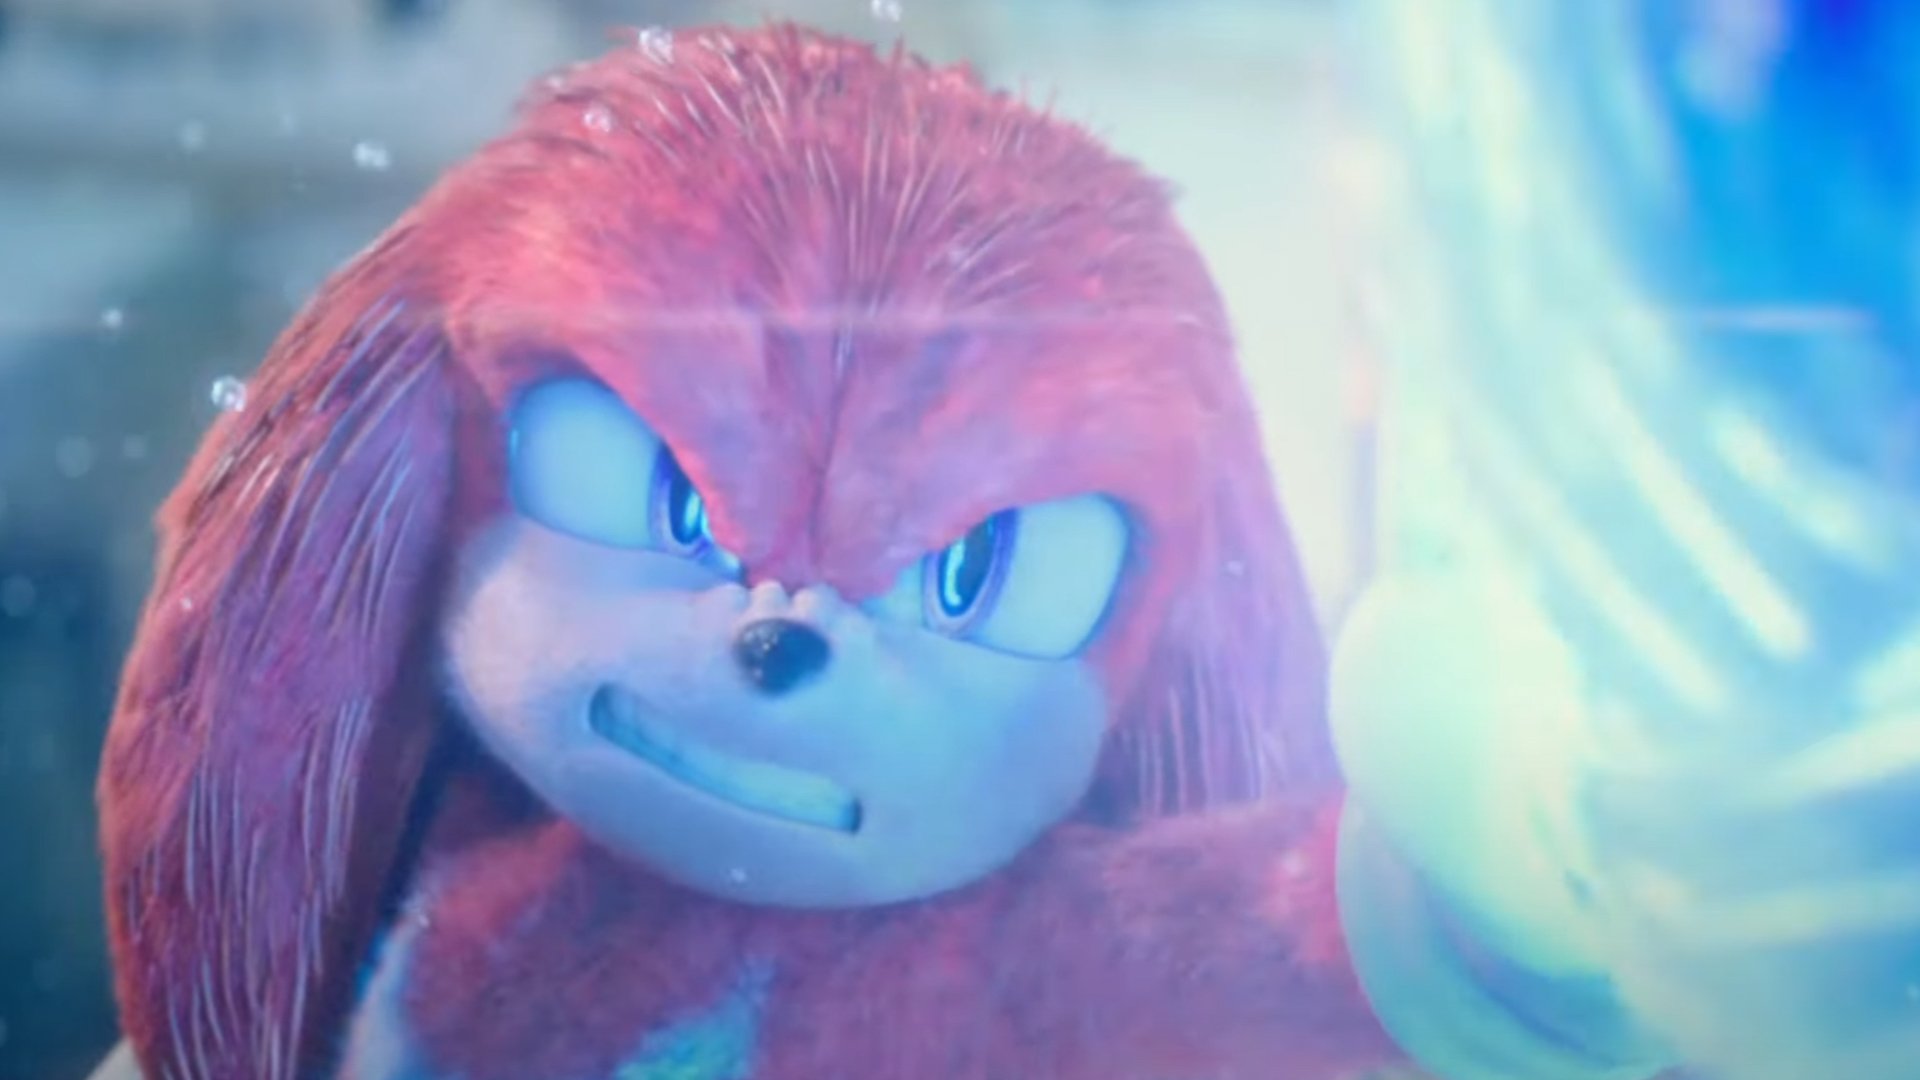 Sonic the Hedgehog release date, cast, plot, trailer: When is